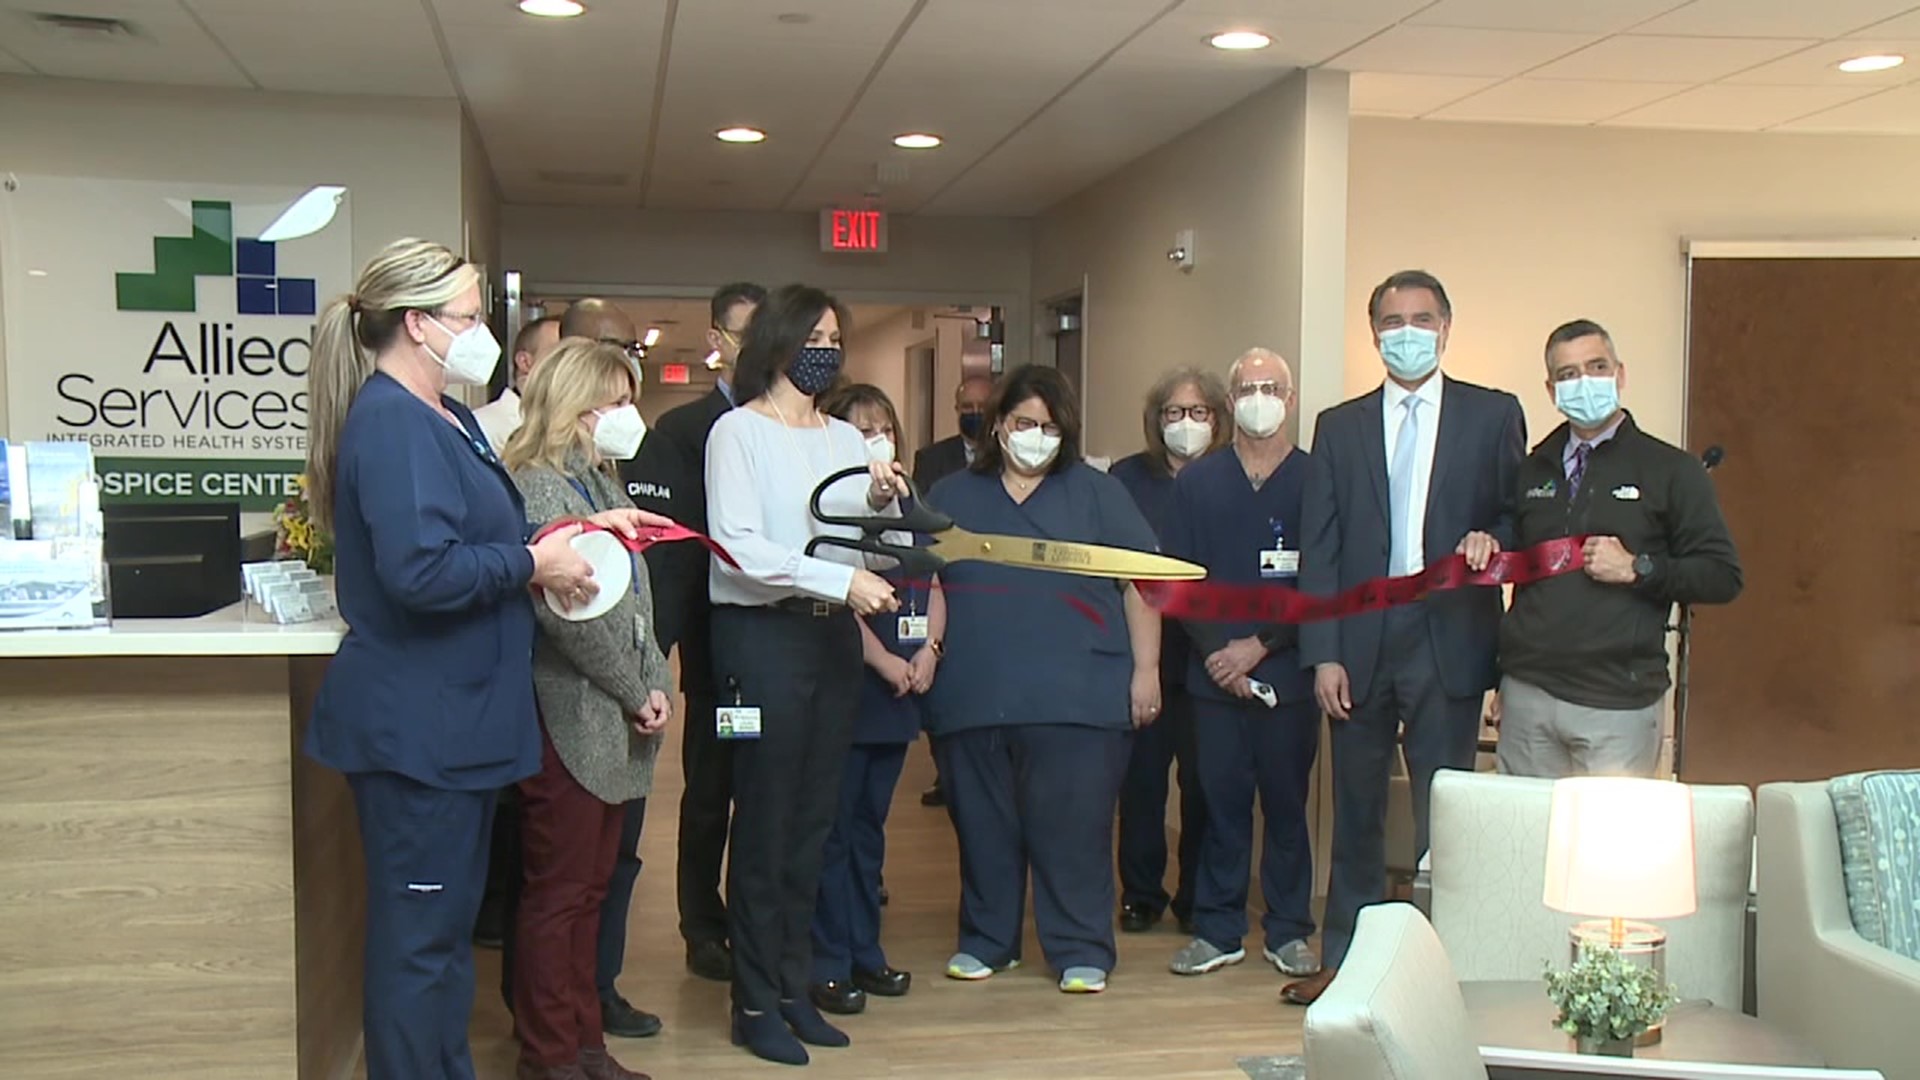 The new specialized care facility is located on South Meade Street